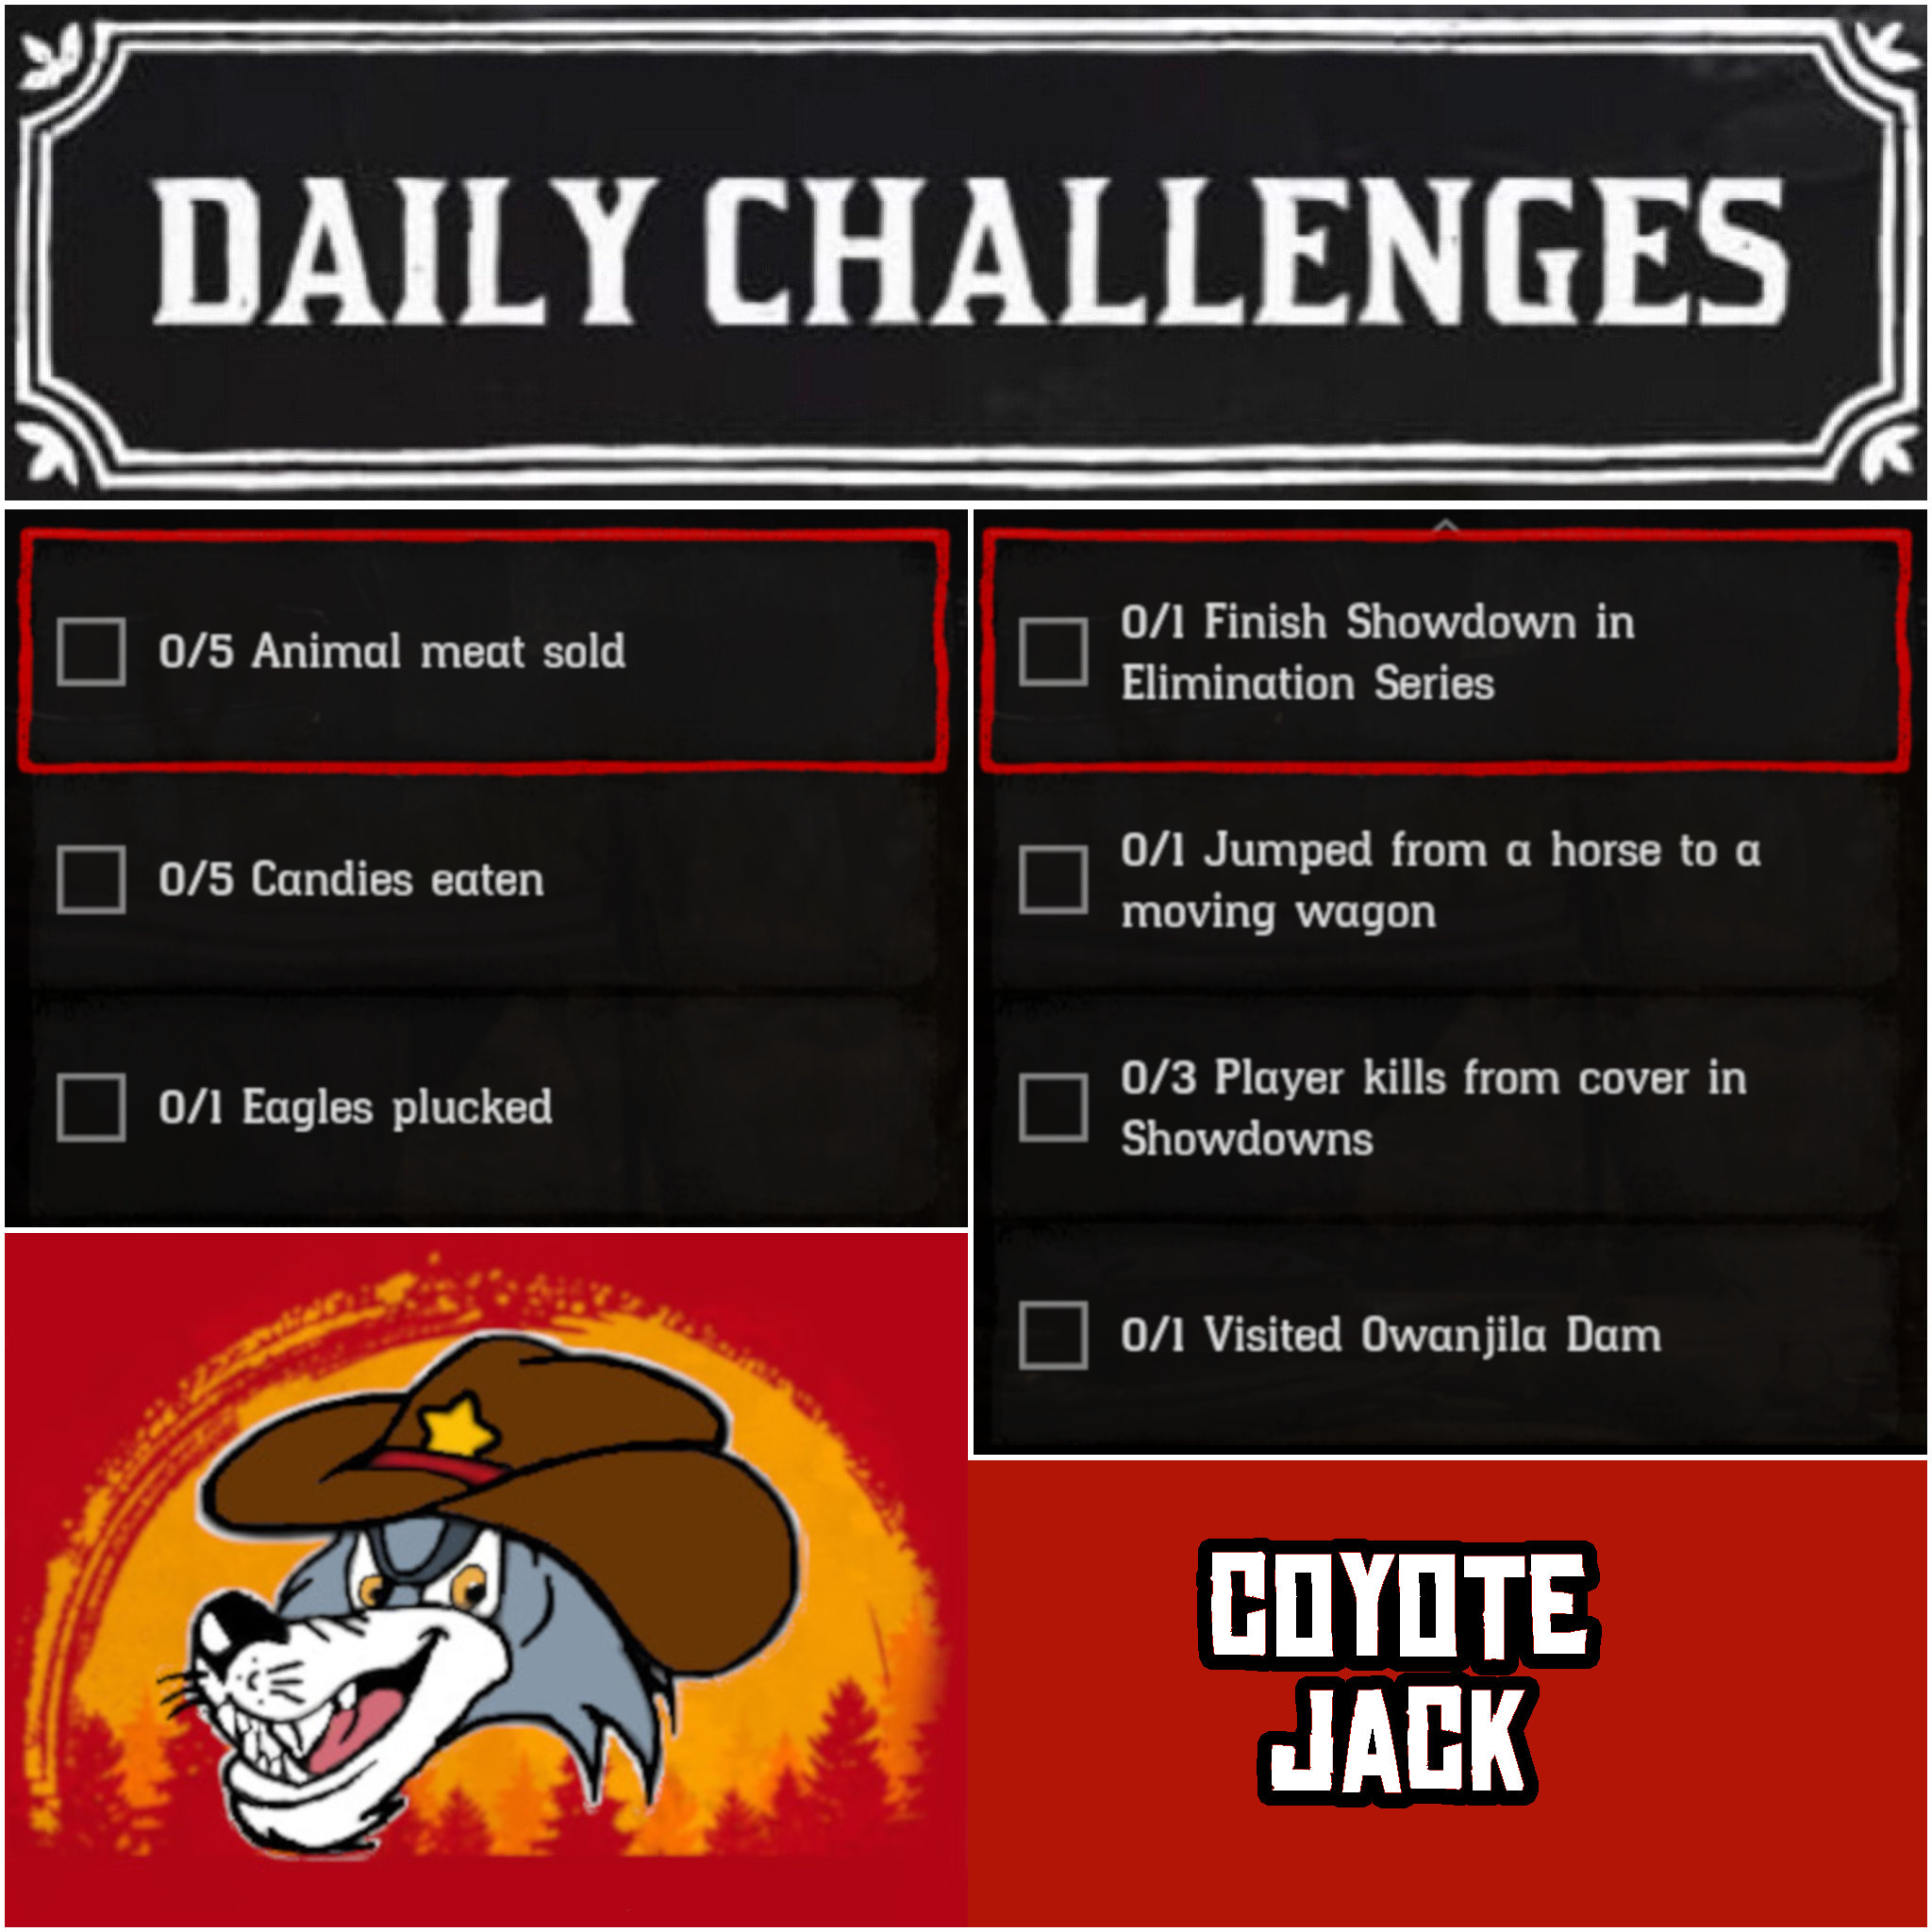 You are currently viewing Tuesday 02 February Daily Challenges